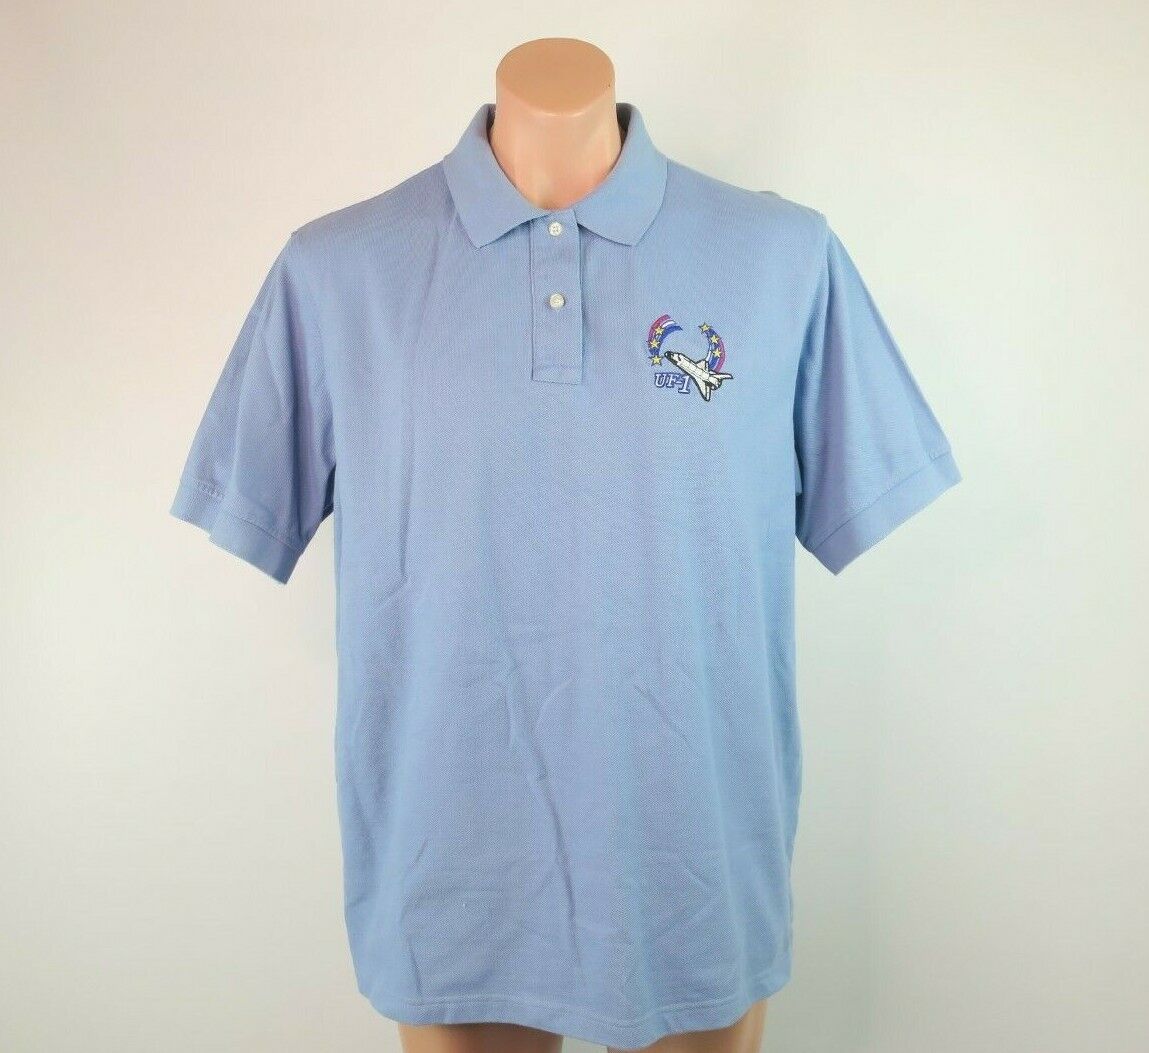 VTG 90s NASA Space Center Shirt L/XL Employee Issue Embroidered Rocket UF-1 Blue